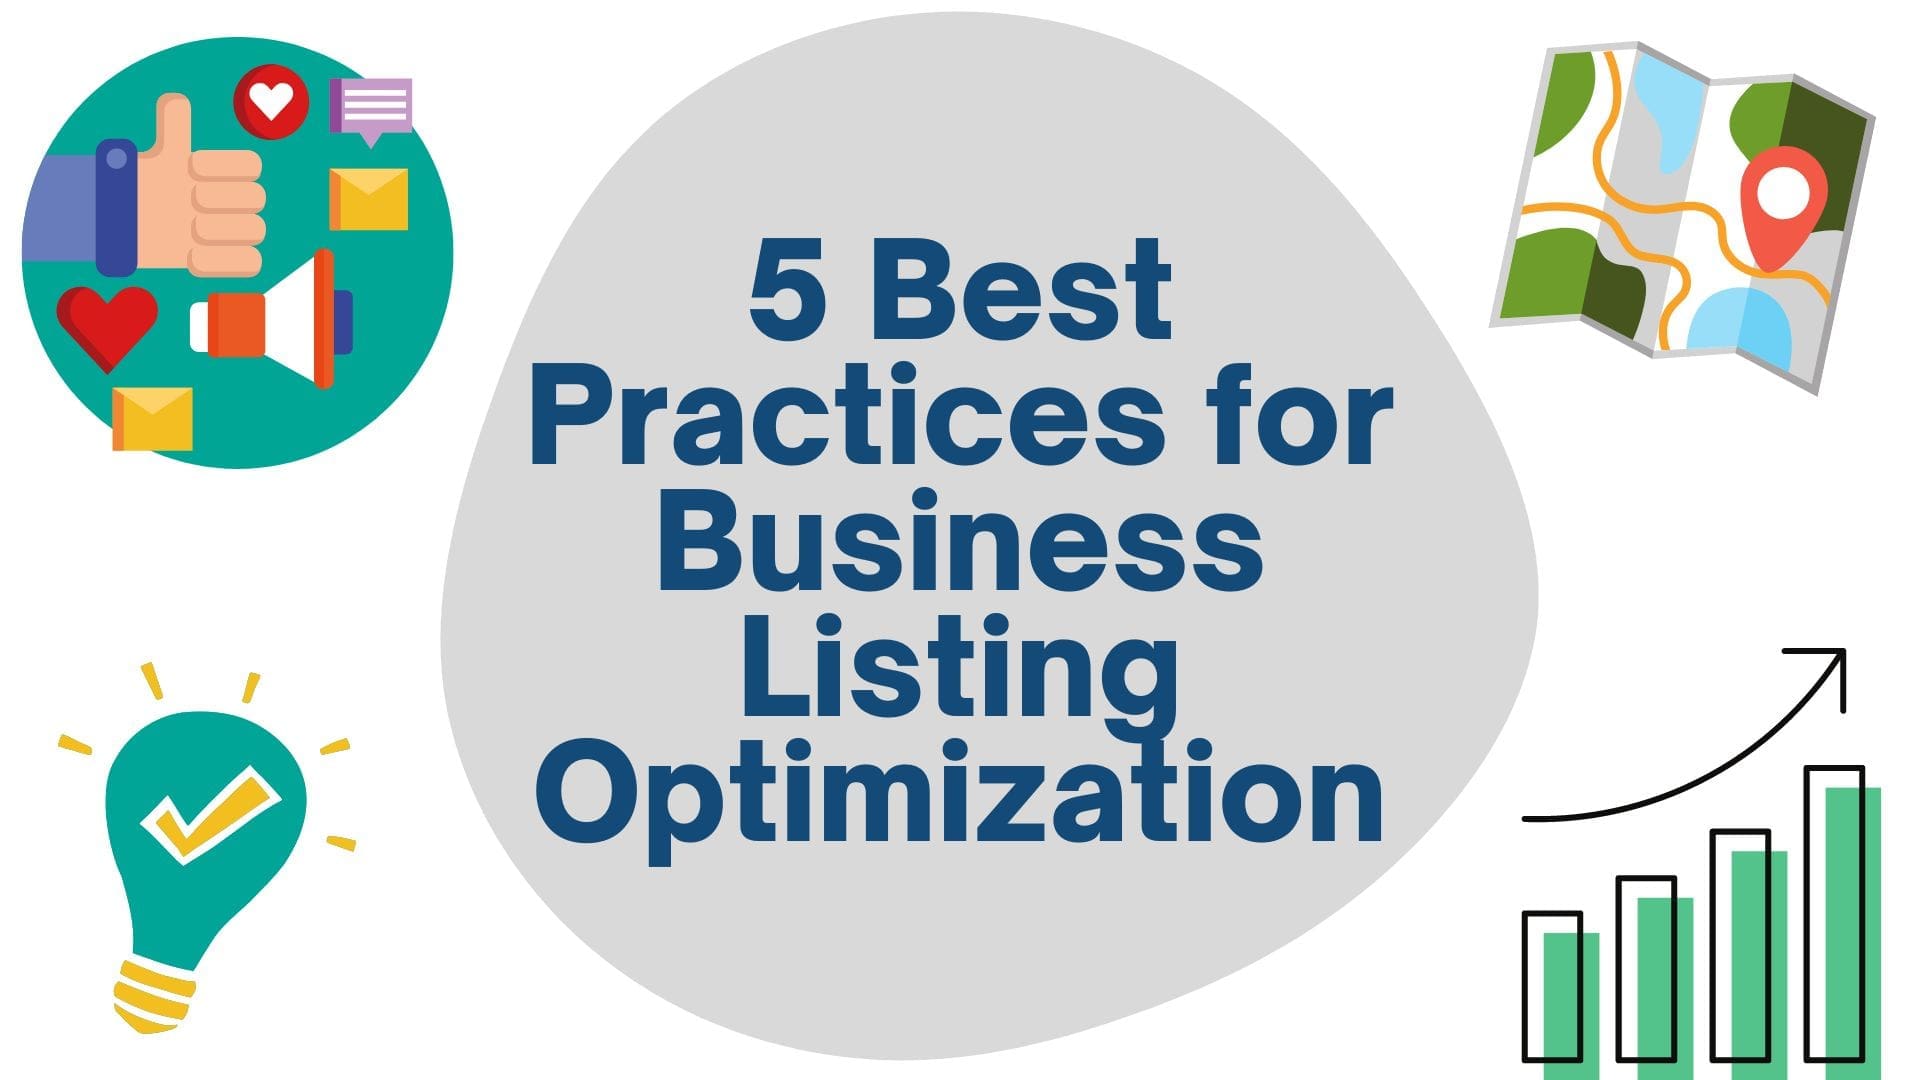 Best Practices for Business Listing Optimization